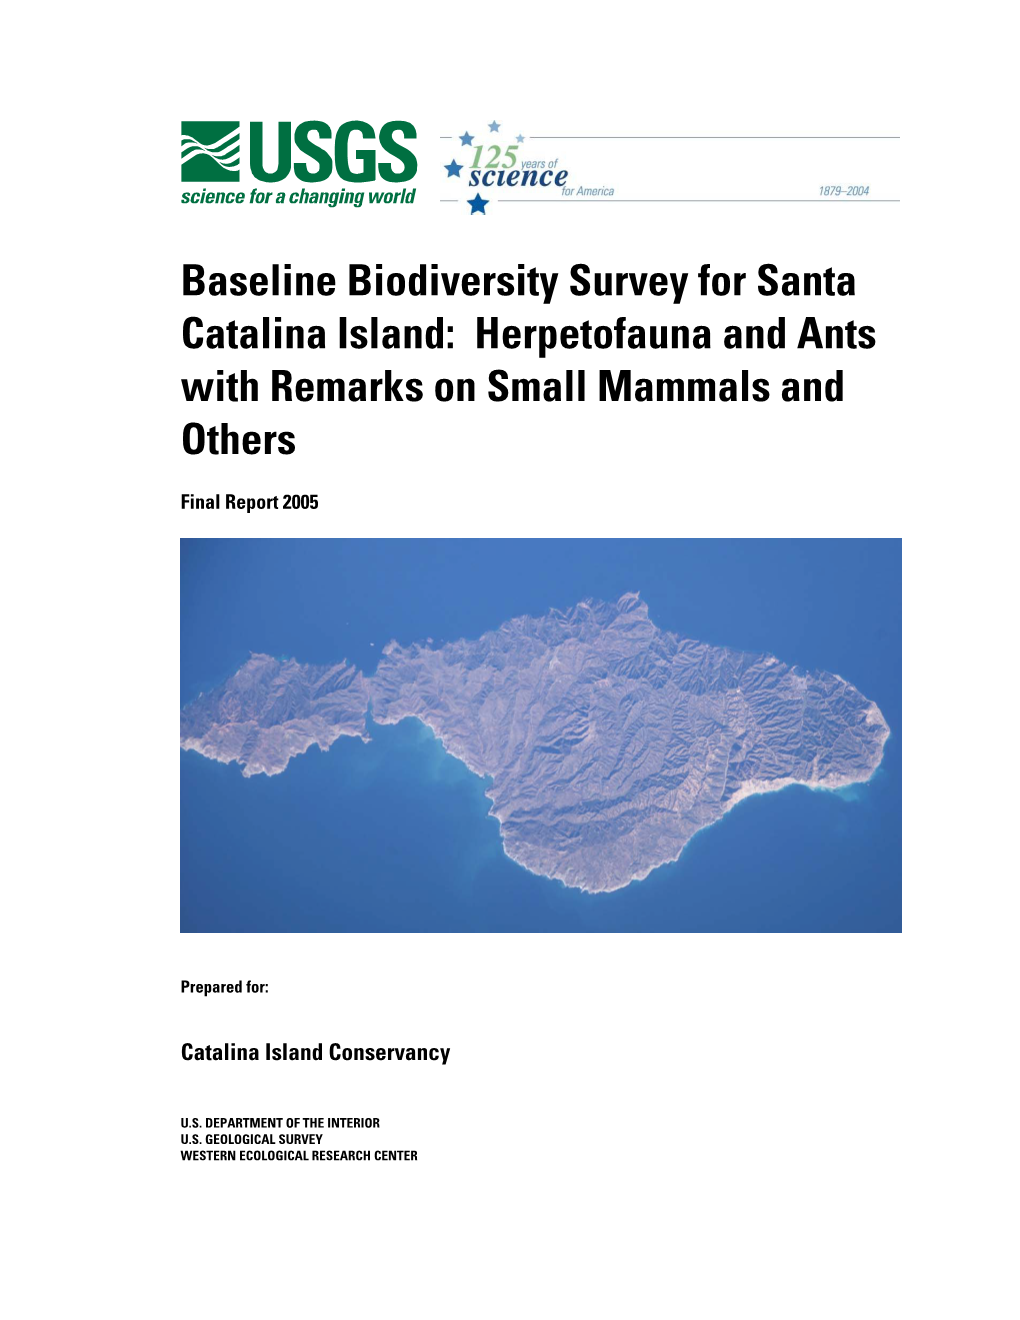 Baseline Biodiversity Survey for Santa Catalina Island: Herpetofauna and Ants with Remarks on Small Mammals and Others